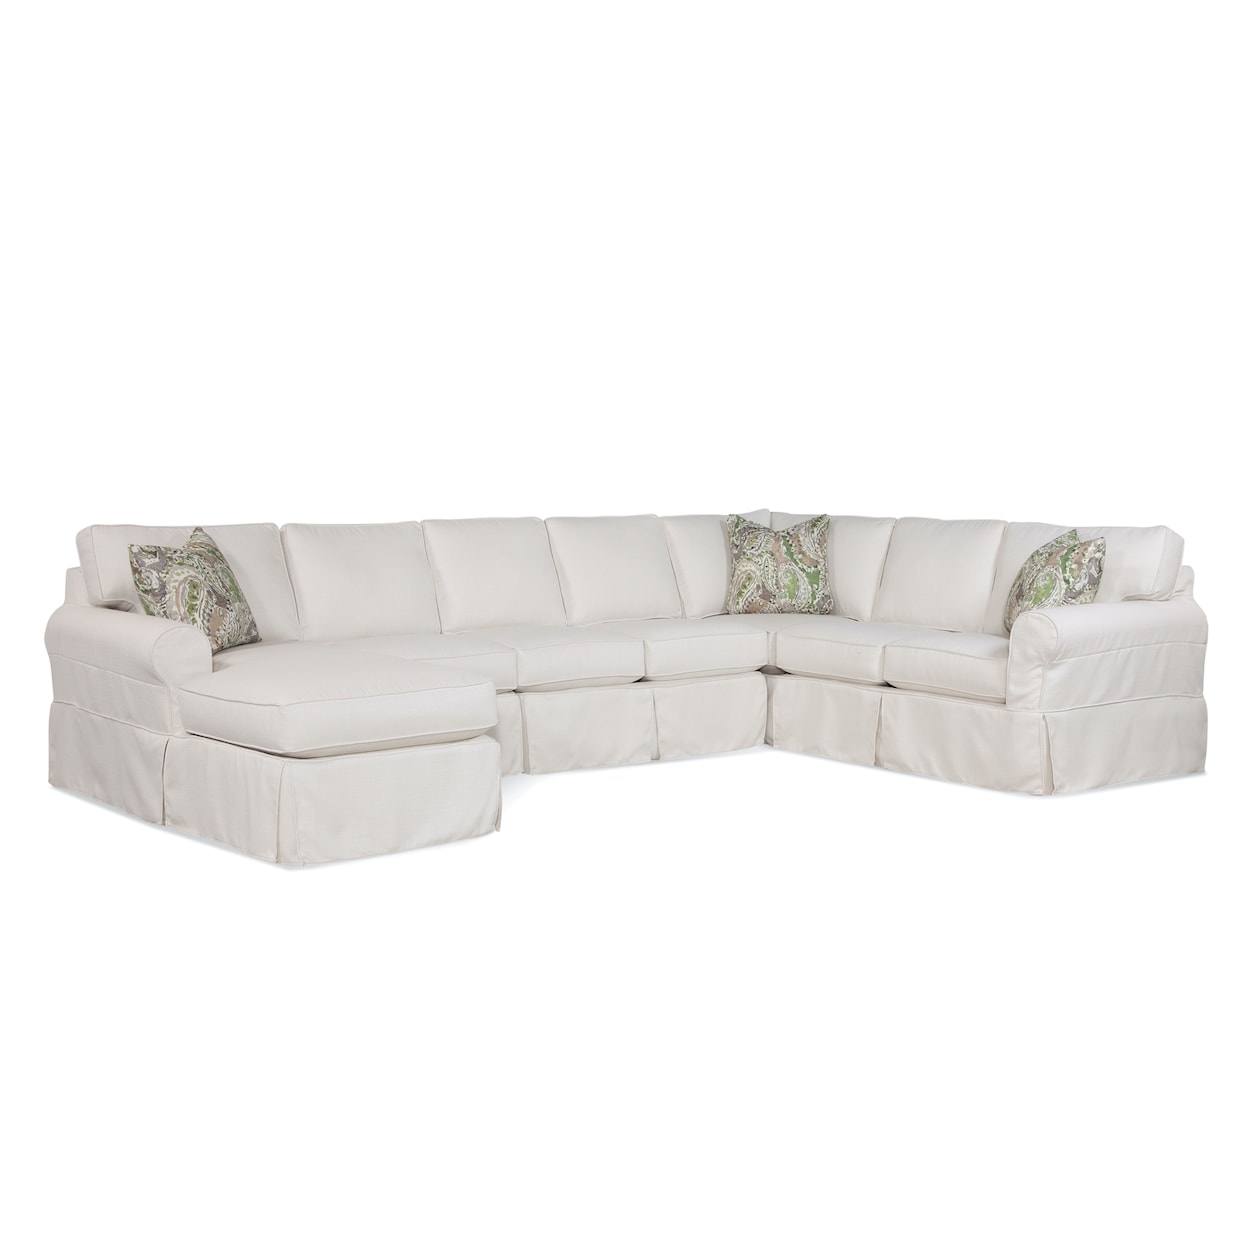 Braxton Culler Bedford 4-Piece Sectional Sofa